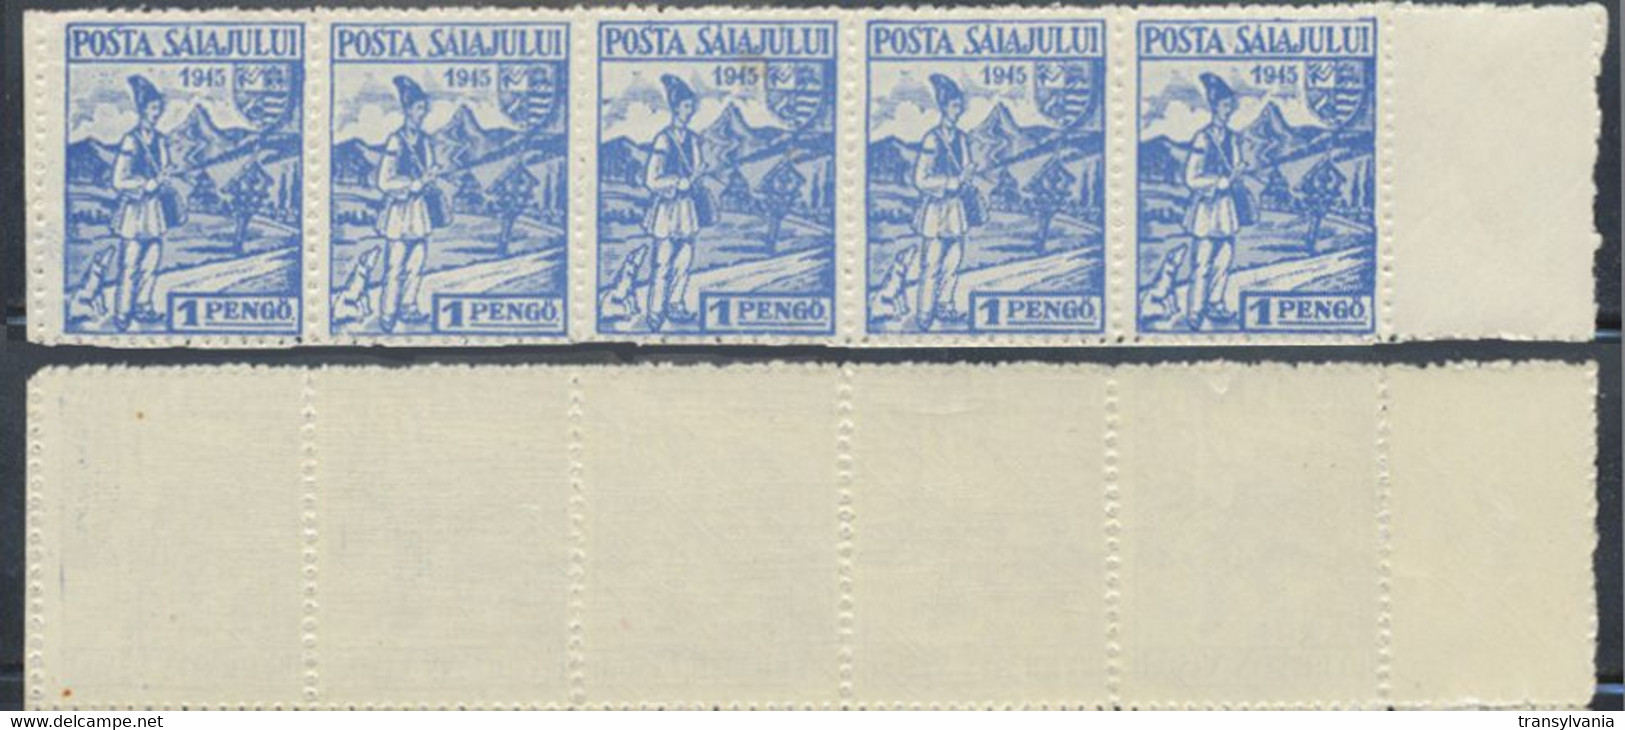 Romania Northern Transylvania 1945 Salaj 2nd Issue Strip Of 5 Stamps 1 Pengo With Attending Gutter, MNH - Transylvania